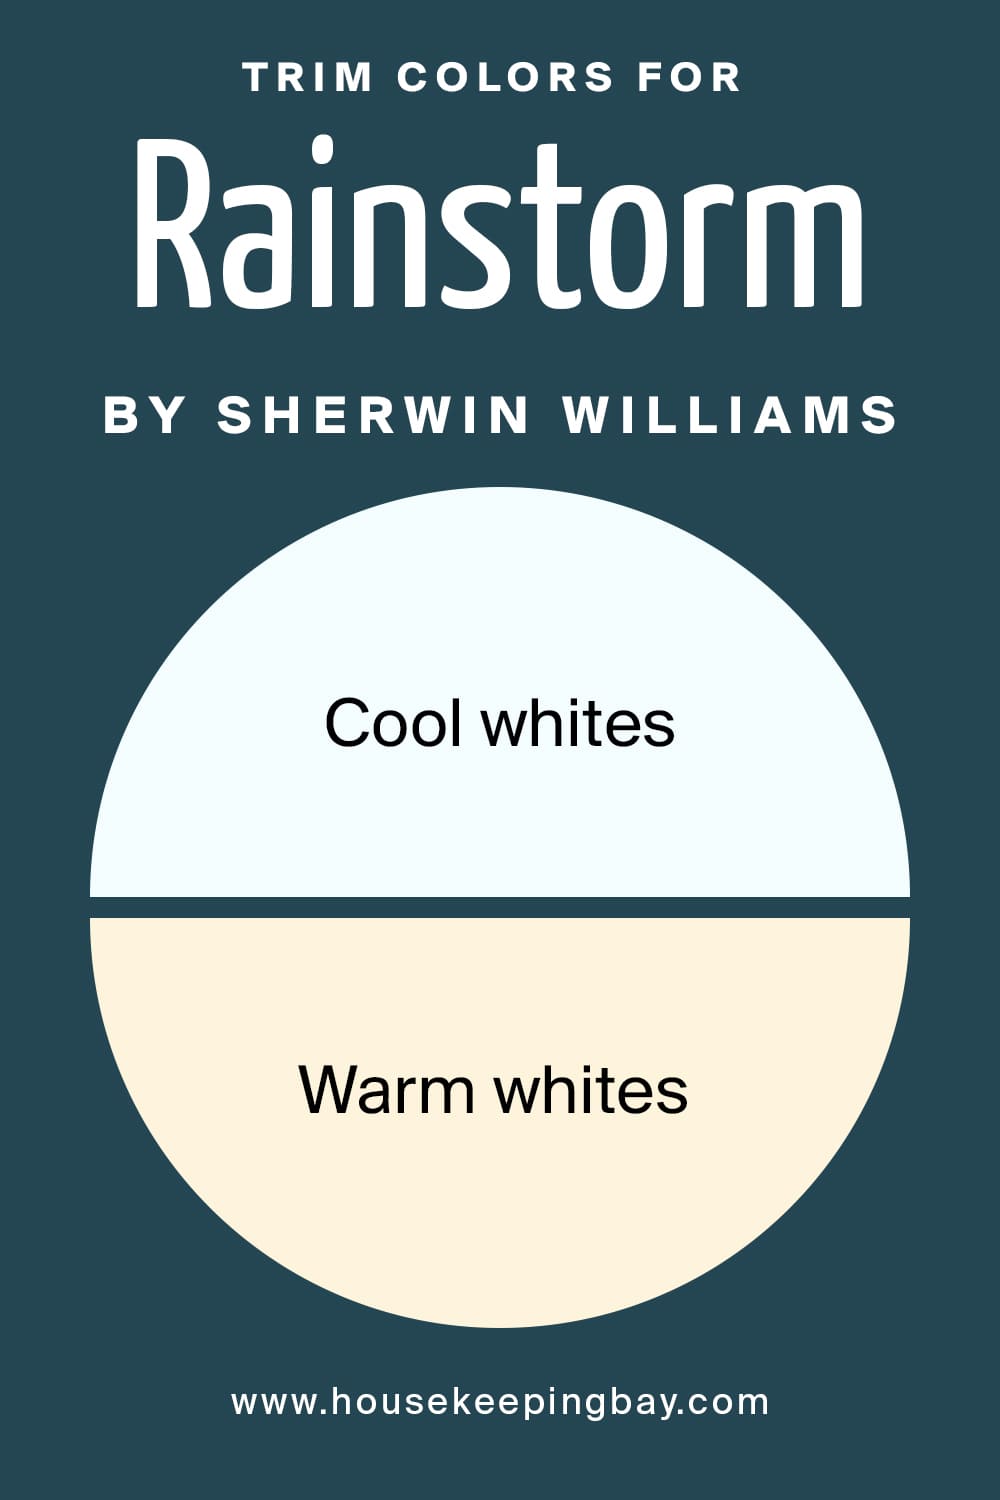 Trim Colors for Rainstorm by Sherwin Williams